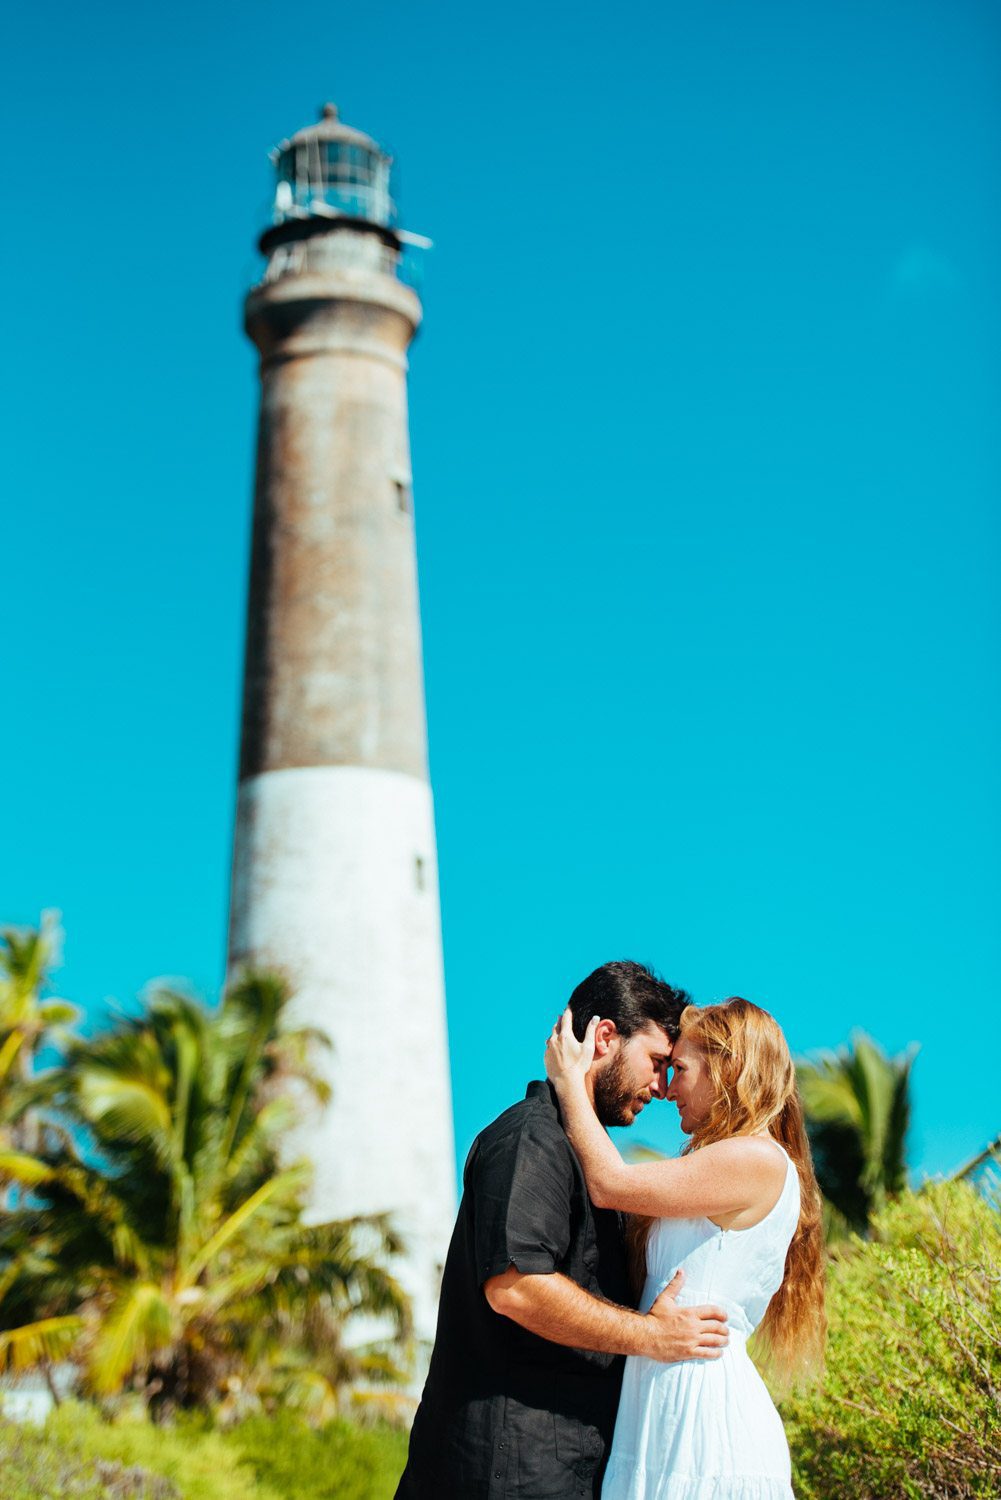 An engaged couple embracing in front of a picturesque lighthouse during their destination engagement session at Dry Tortugas.